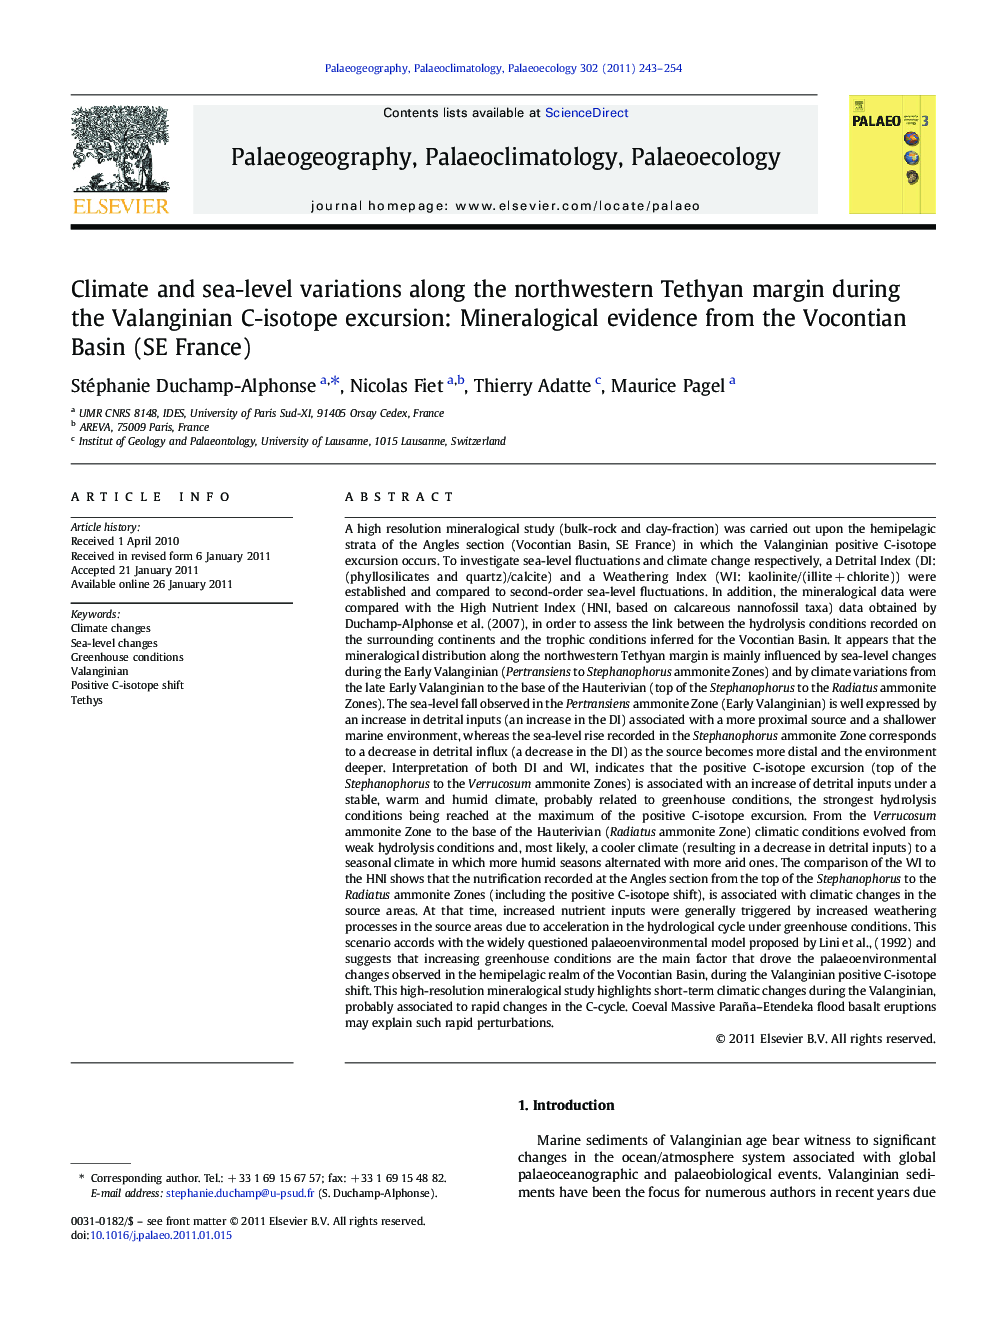 Climate and sea-level variations along the northwestern Tethyan margin during the Valanginian C-isotope excursion: Mineralogical evidence from the Vocontian Basin (SE France)